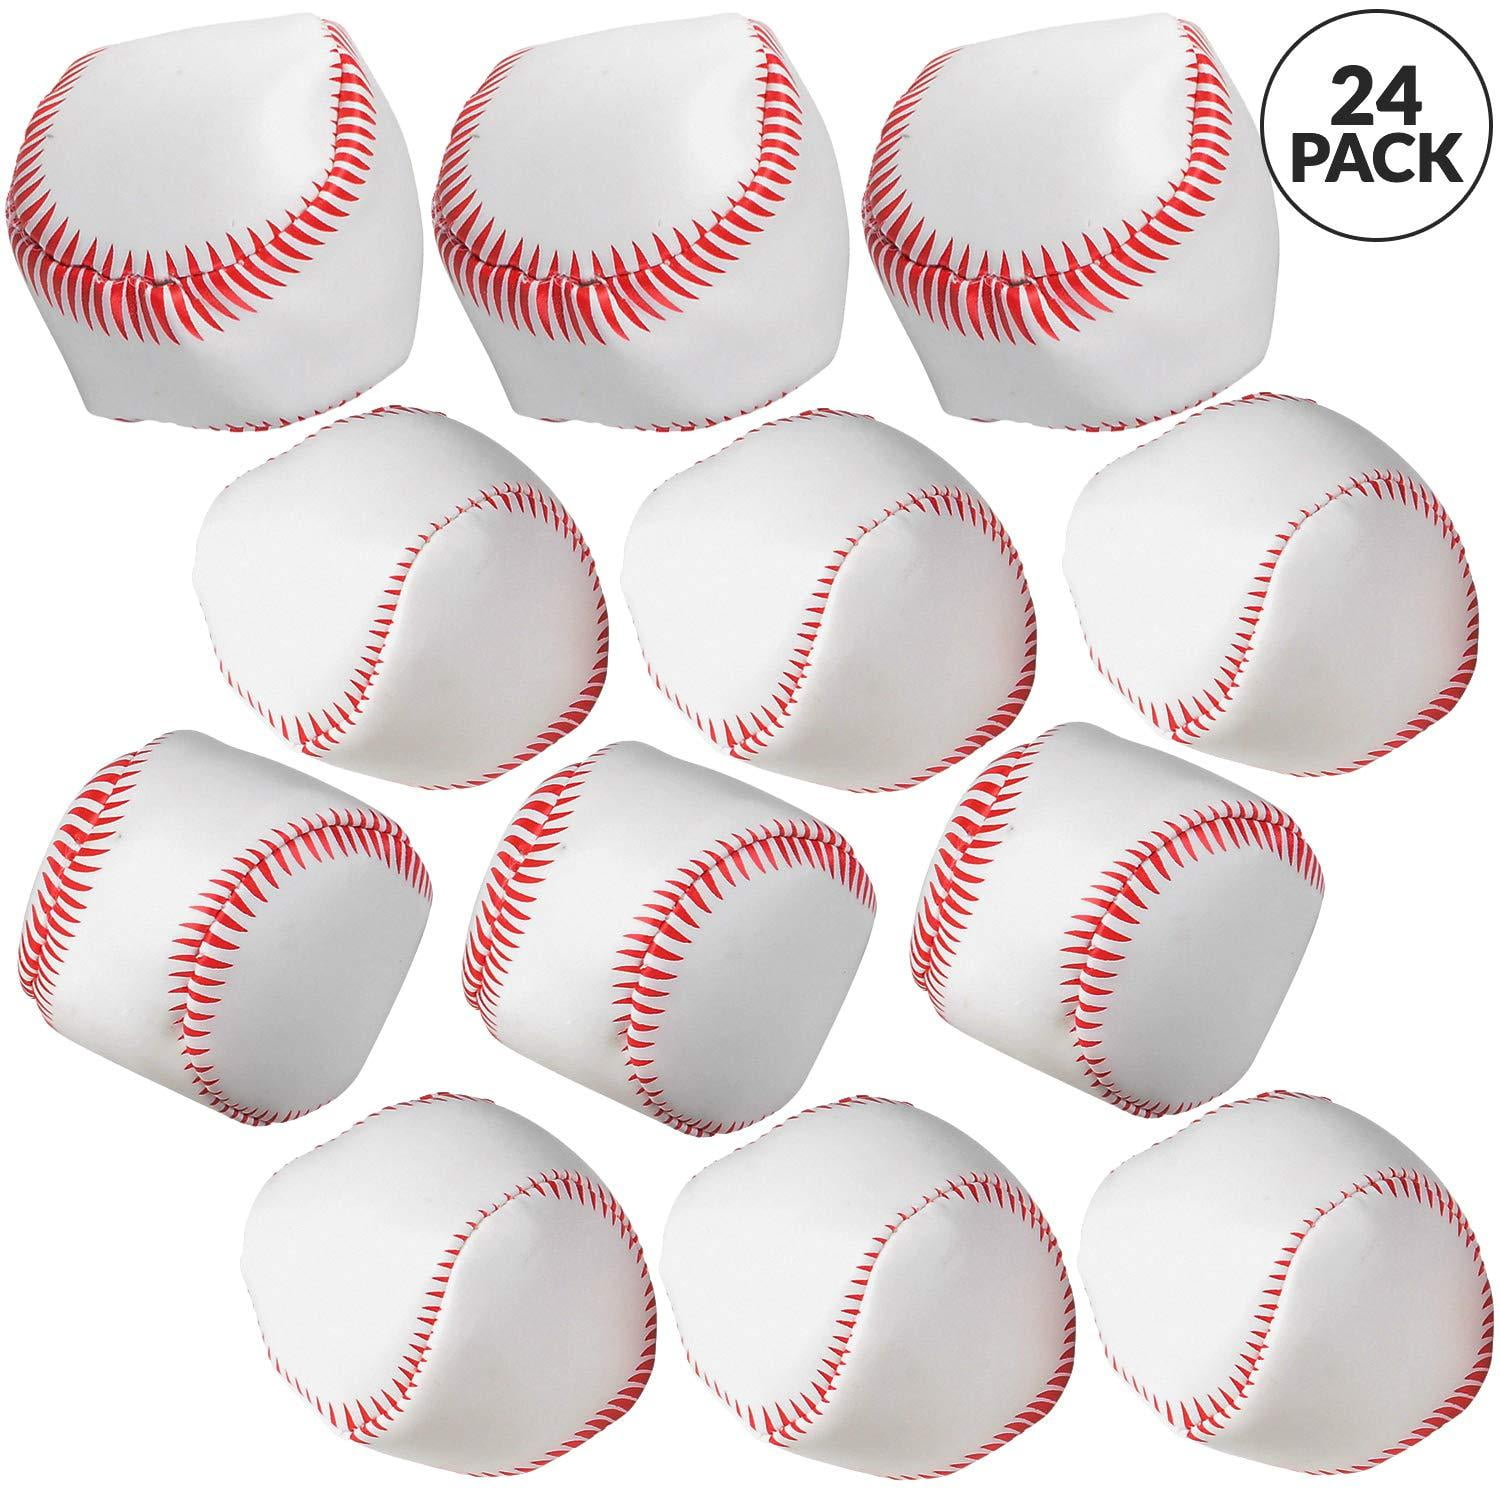 Perfect for Hitting and Indoor or Outdoor Play Youper Soft Foam Training Baseballs for Kids Official Size 6 Pack 